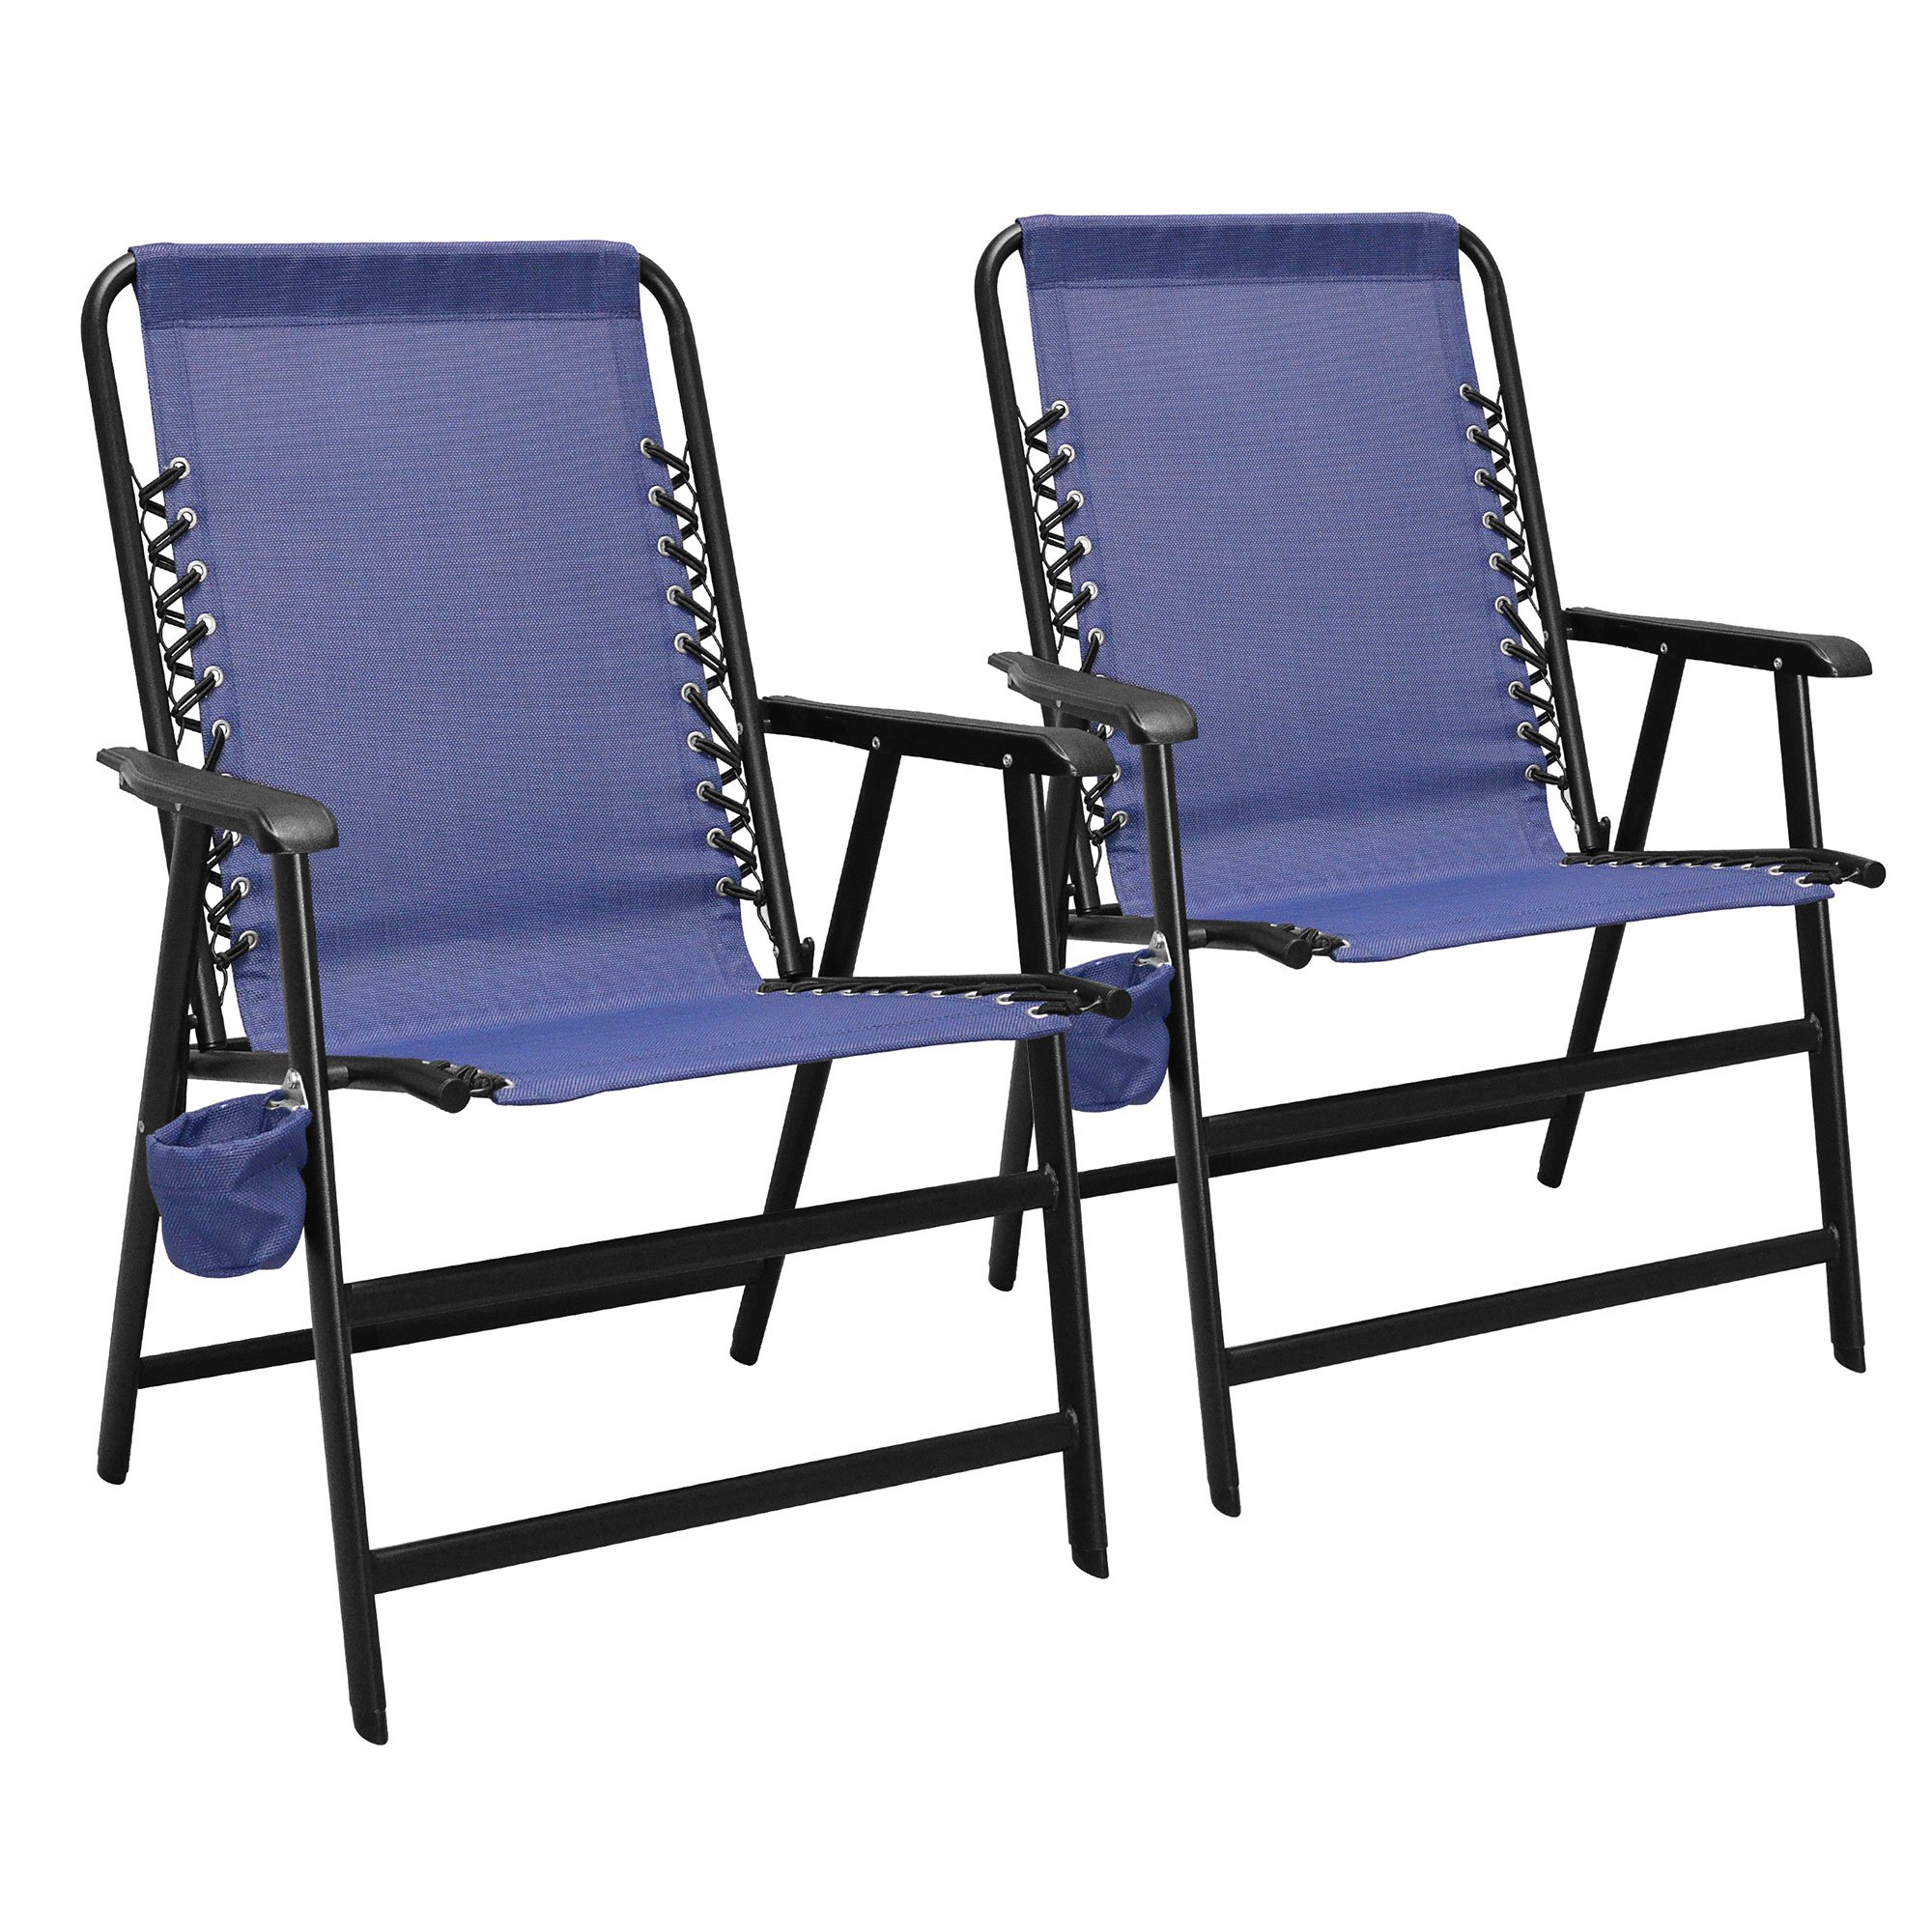 Caravan Canopy Infinity Suspension Folding Chair with Cupholder, Blue (2 Pack) - image 1 of 5